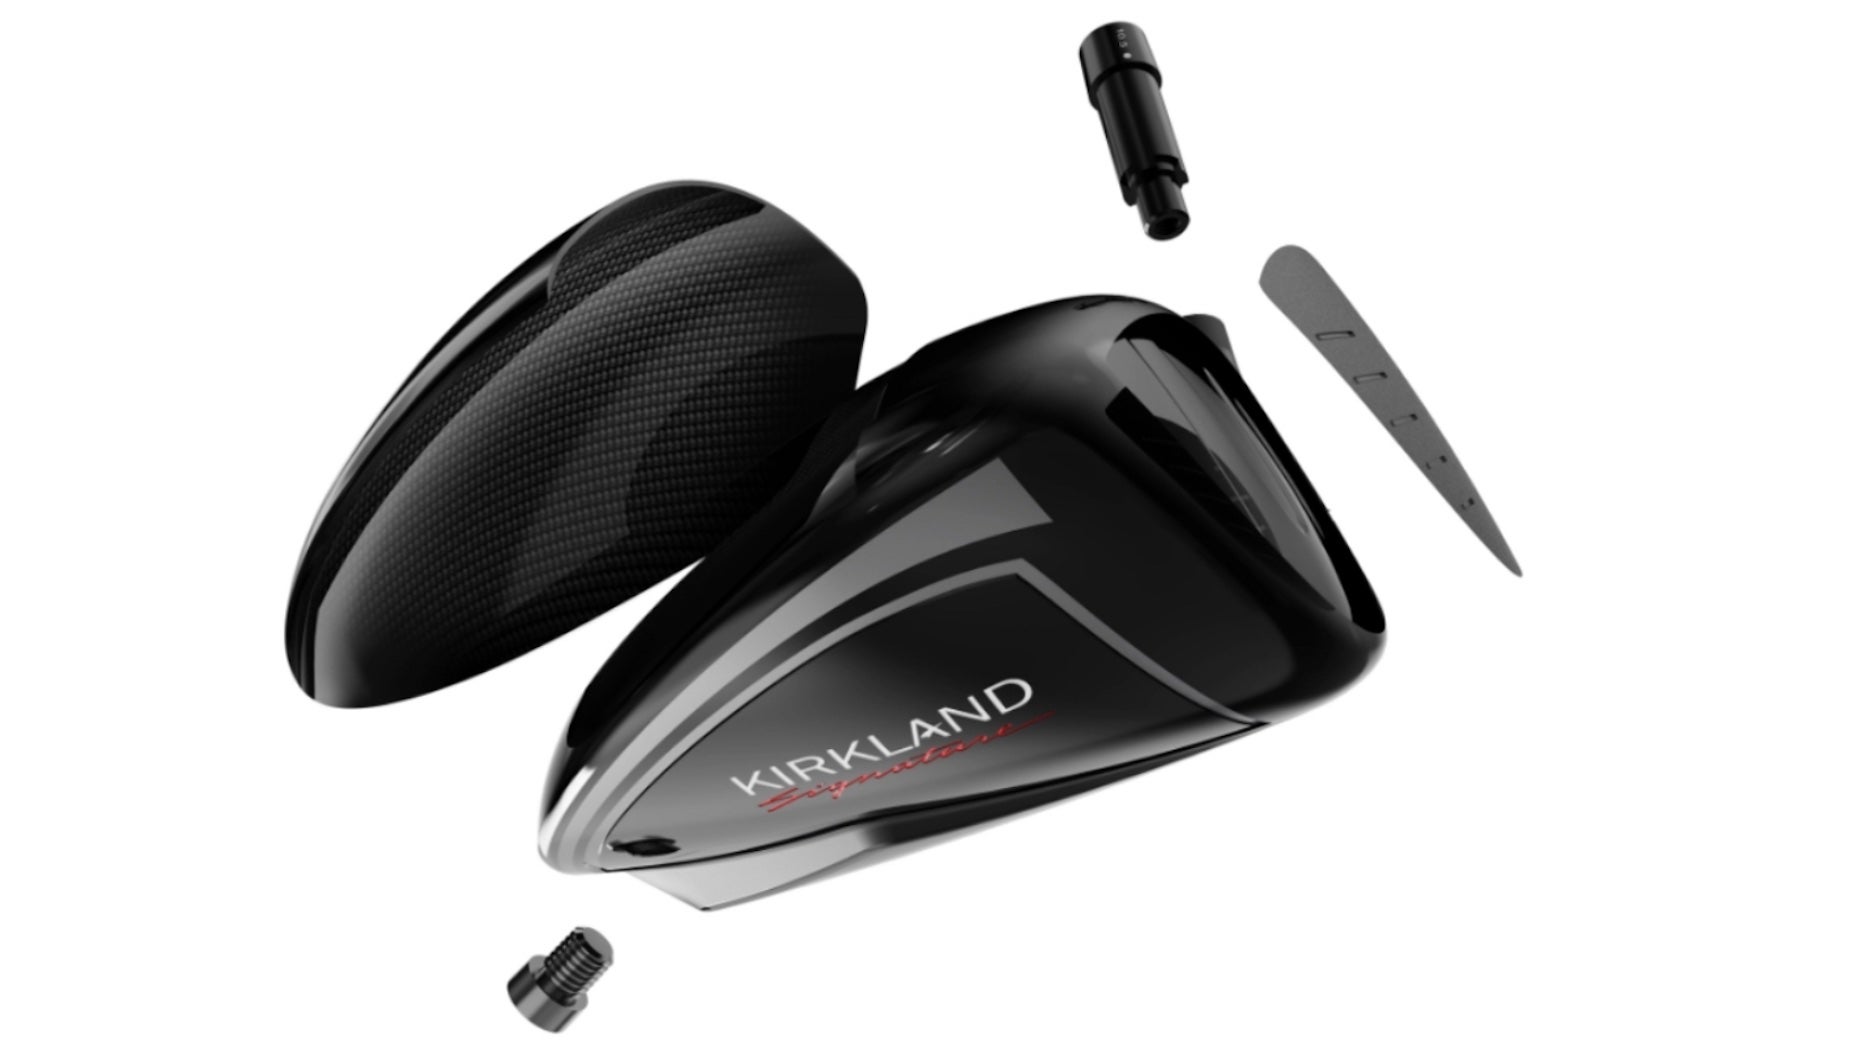 We robot-tested Costco's Kirkland Signature driver. Here are 3